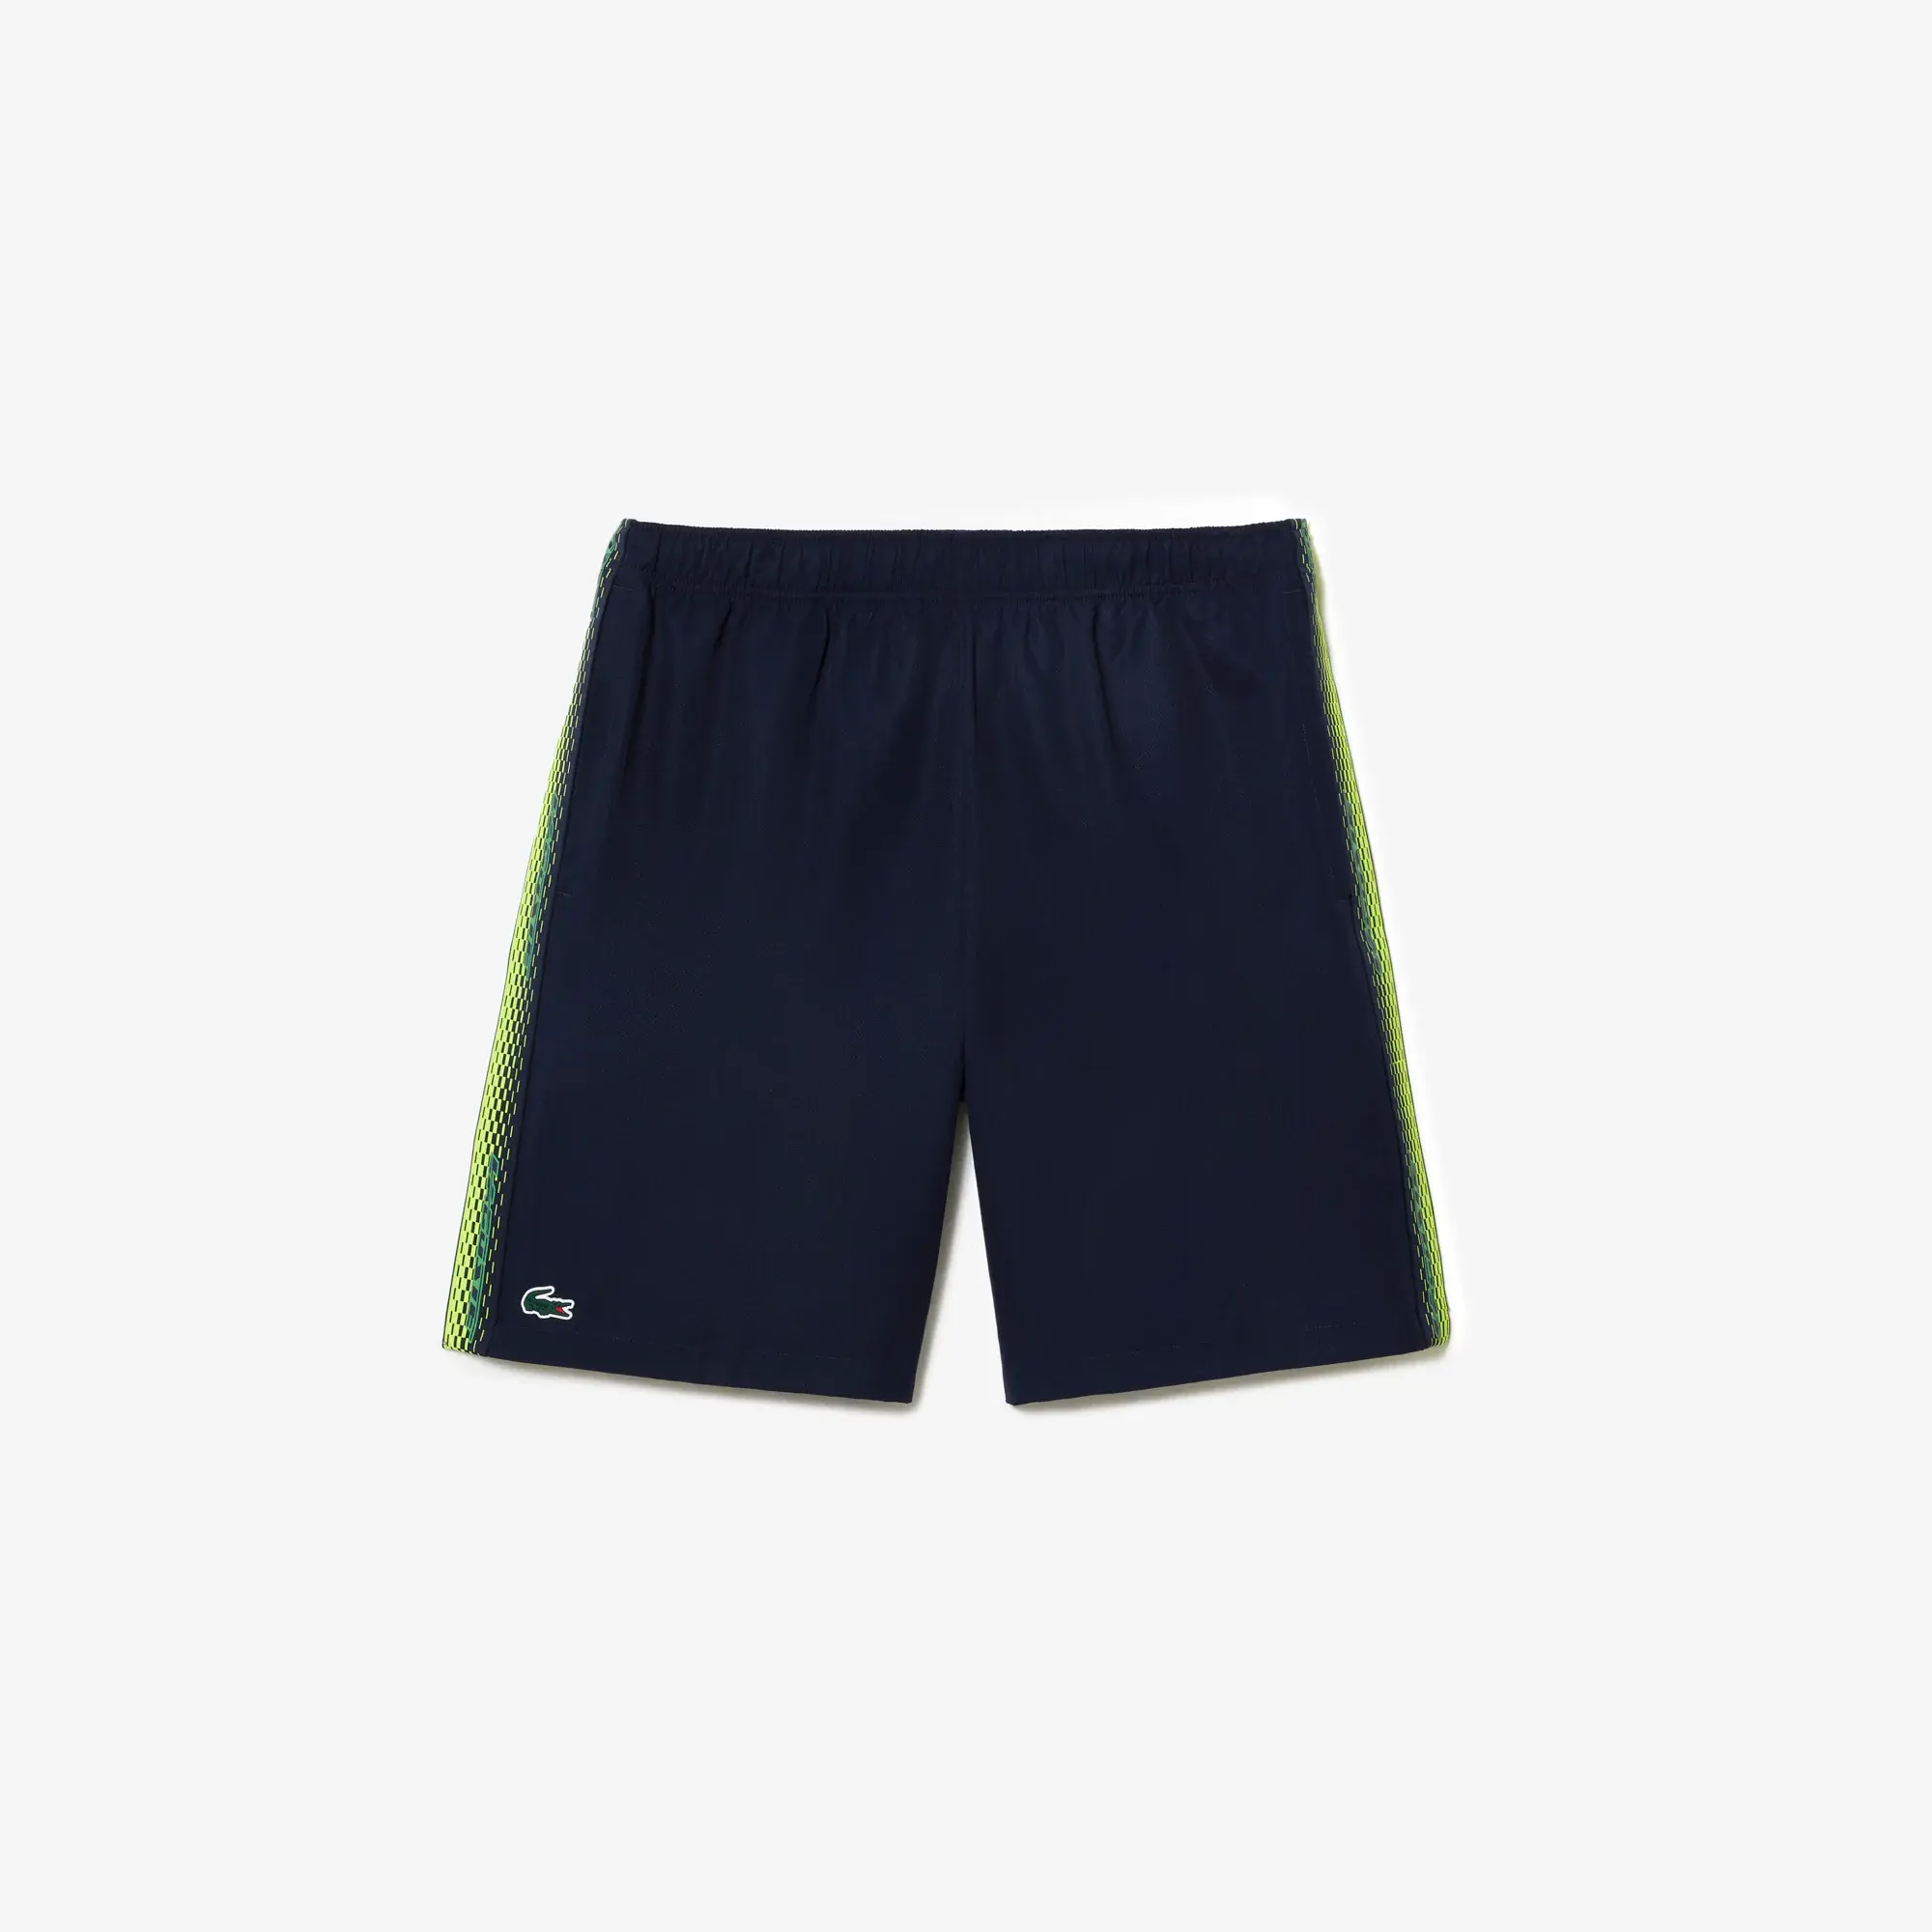 Lacoste Men’s Recycled Polyester Tennis Shorts. 1